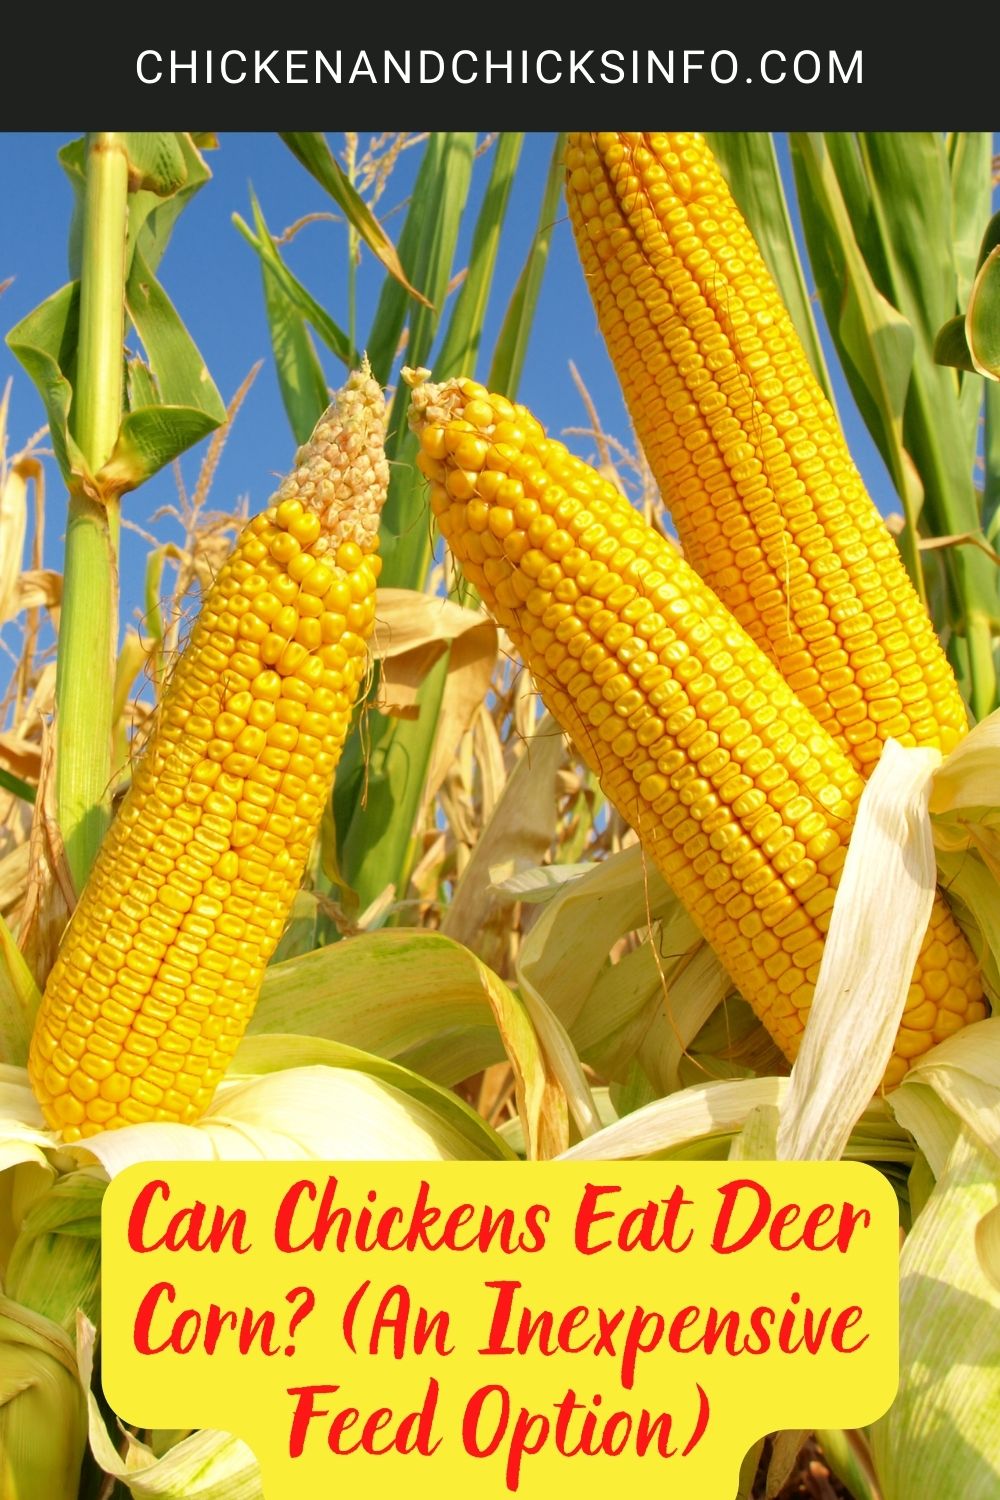 Can Chickens Eat Deer Corn? (An Inexpensive Feed Option) poster.
